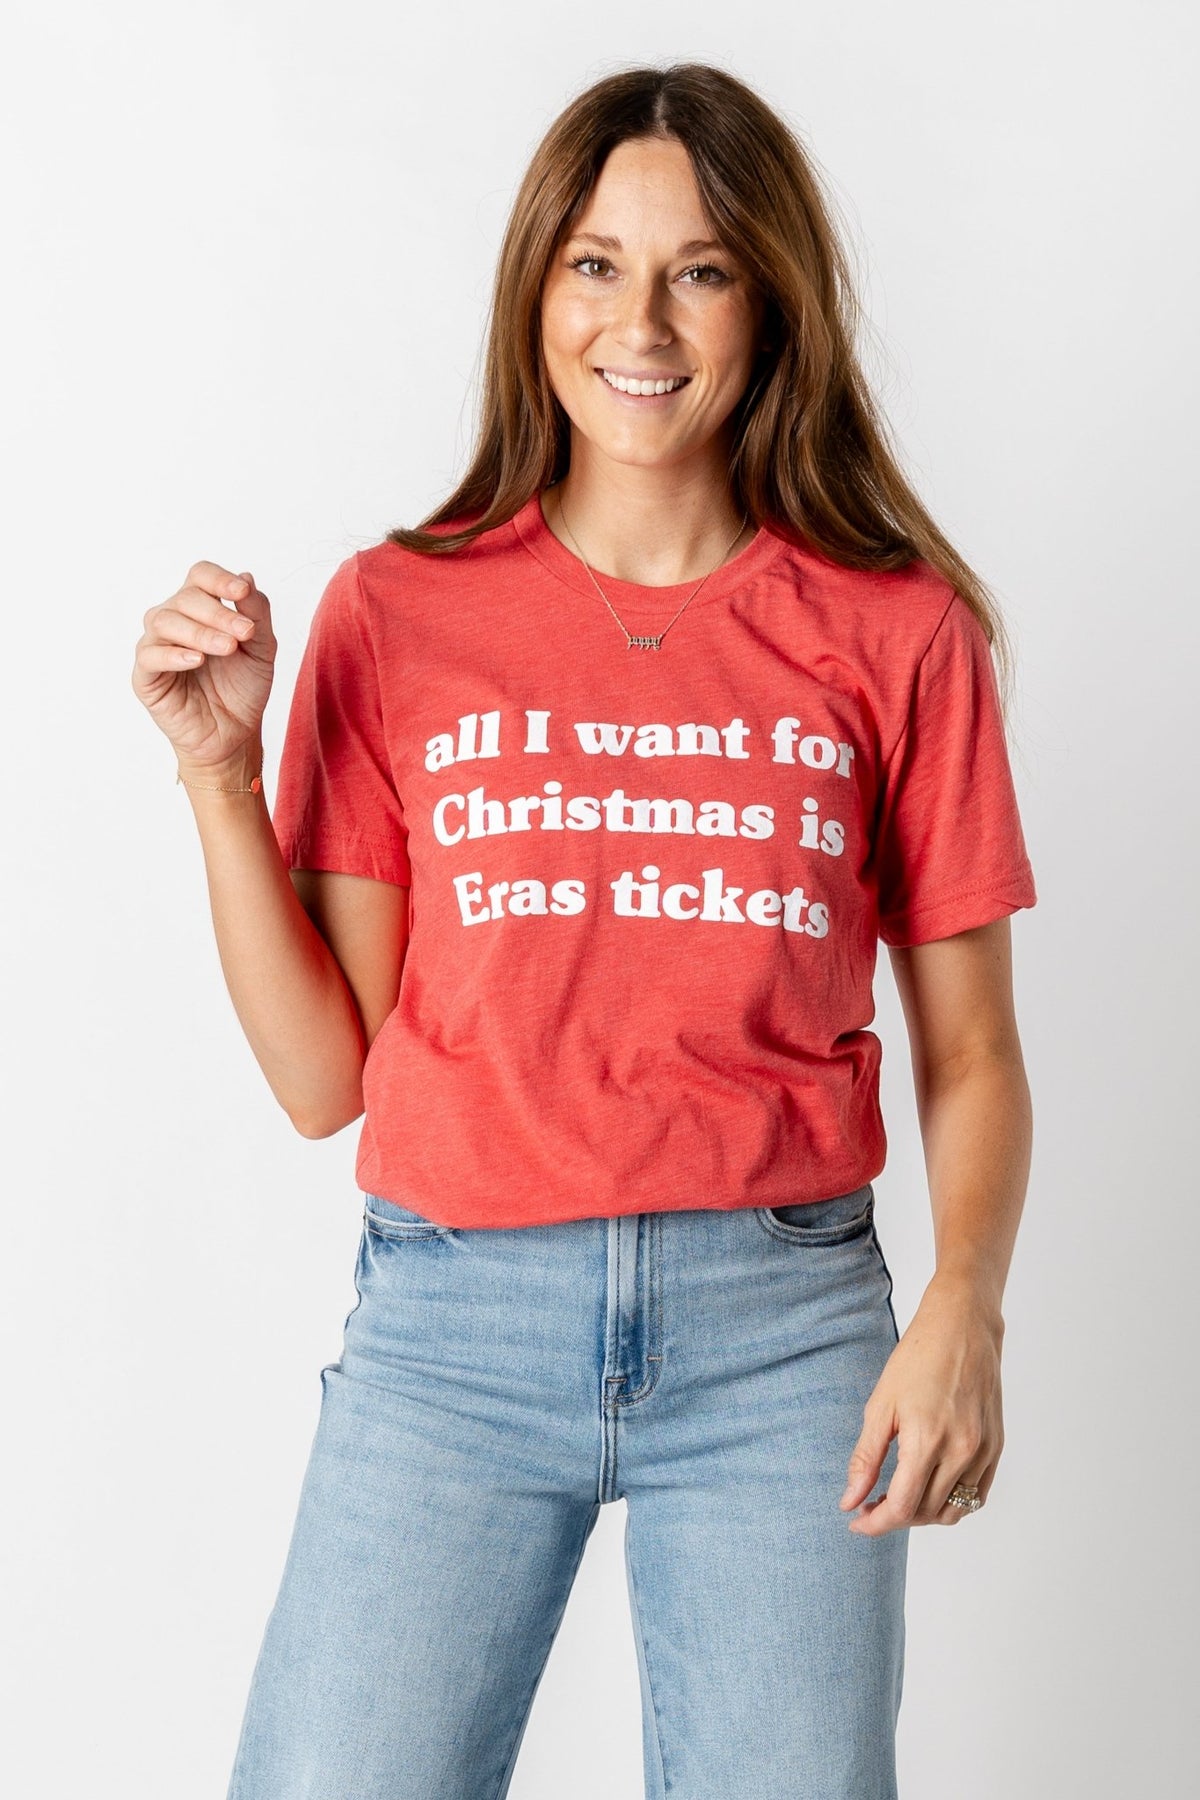 All I want for Christmas is Eras tickets t-shirt red - Trendy Holiday Apparel at Lush Fashion Lounge Boutique in Oklahoma City